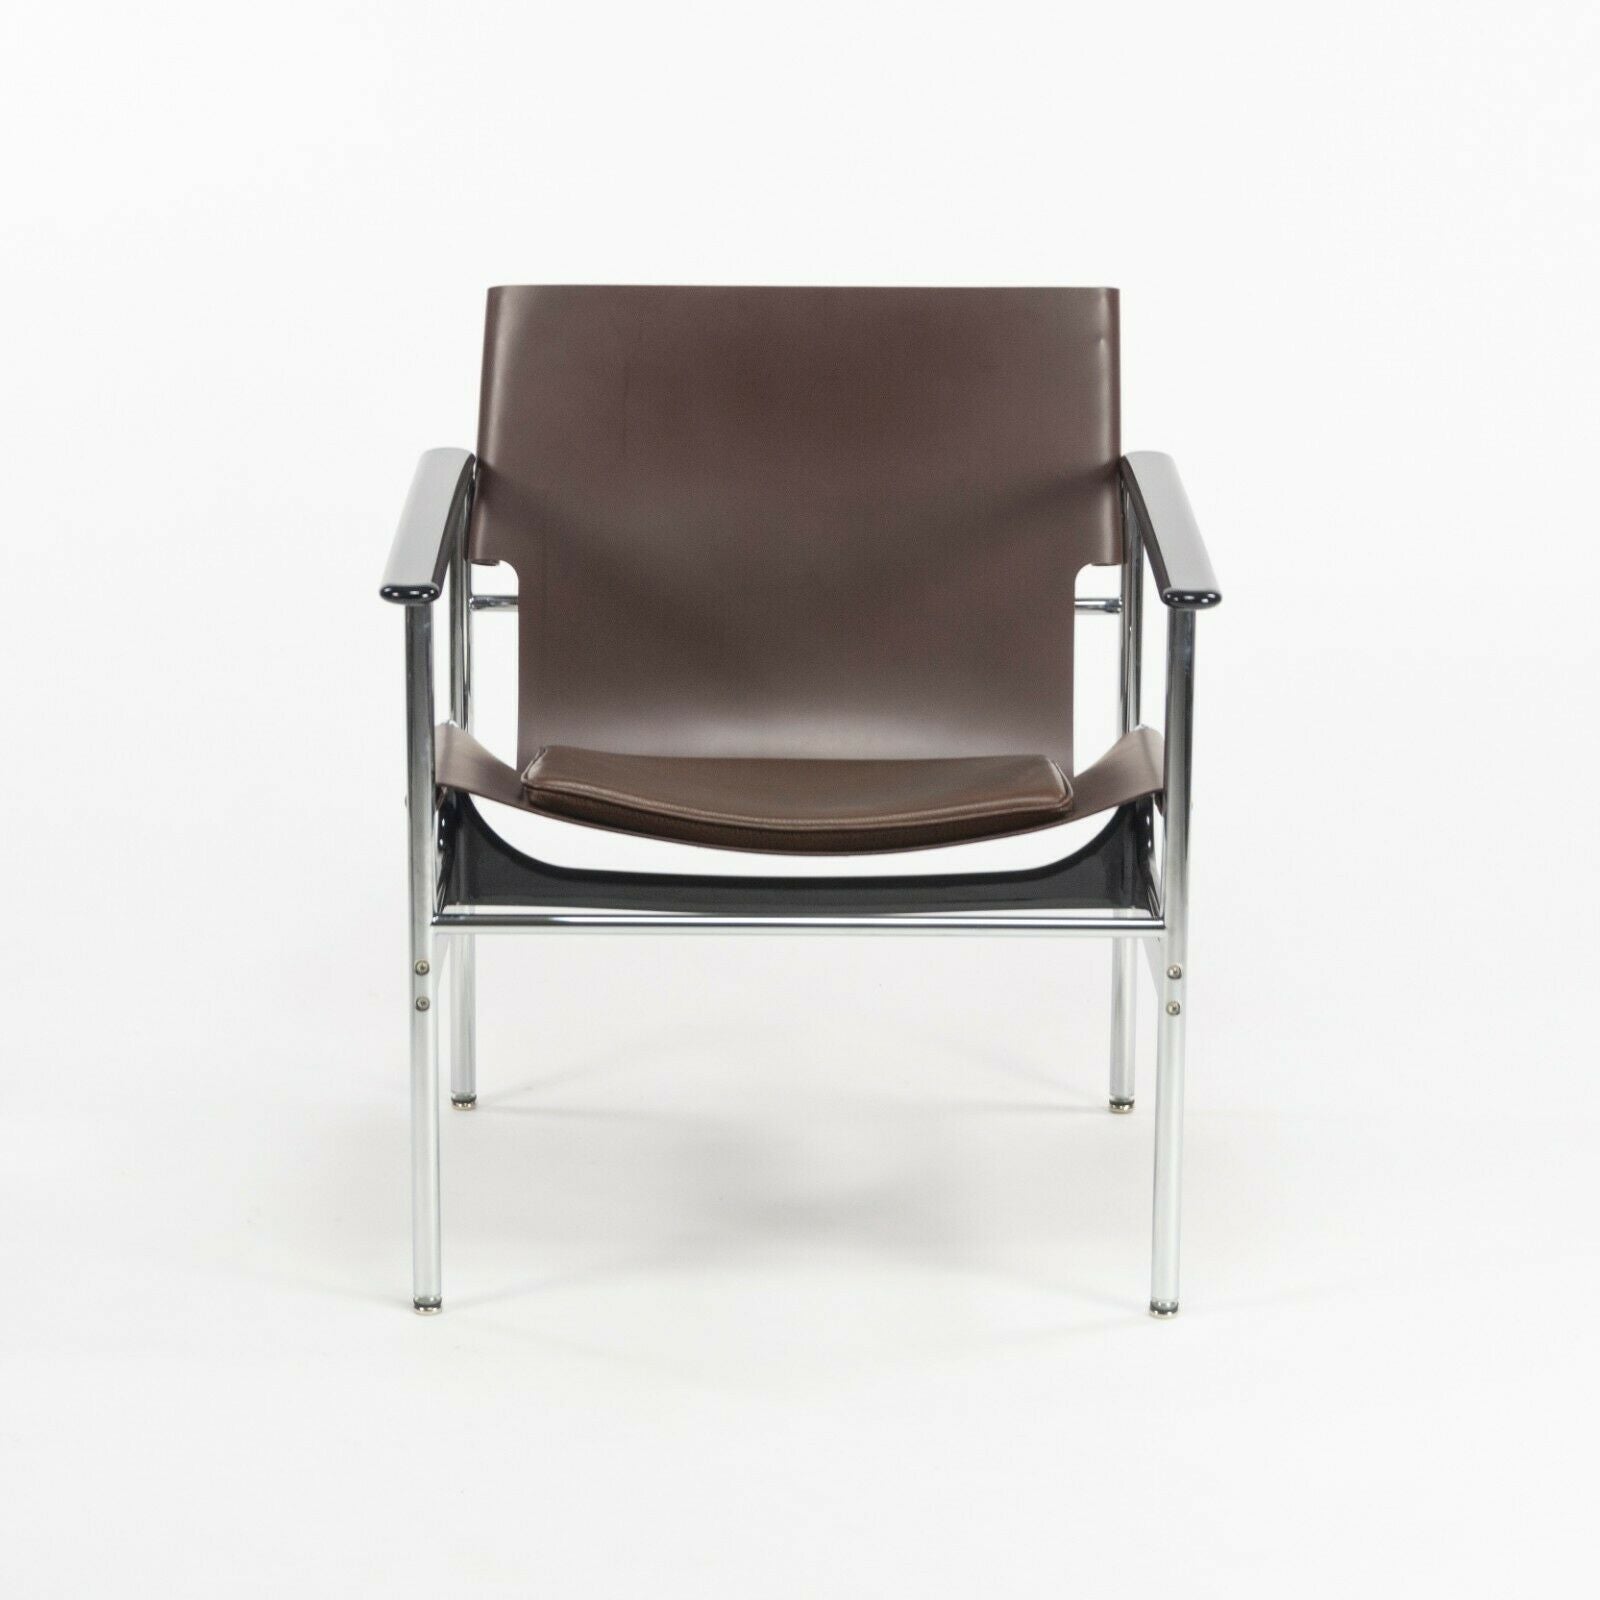 SOLD 2020 Charles Pollock for Knoll Sling Arm Chair with Brown Leather and Chrome 657